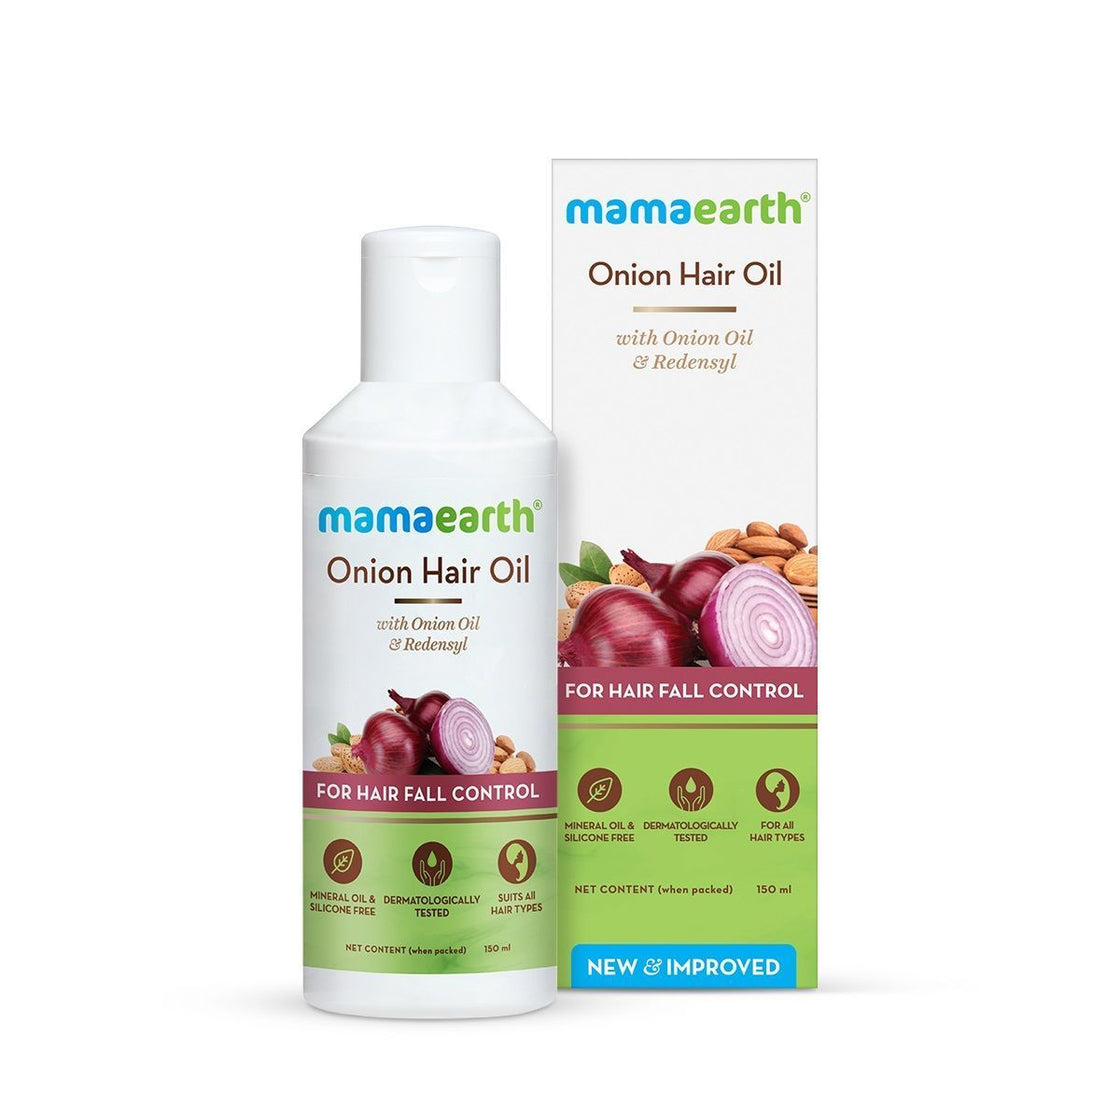 Mamaearth Onion Oil For Hair Regrowth & Hair Fall Control With Redensyl